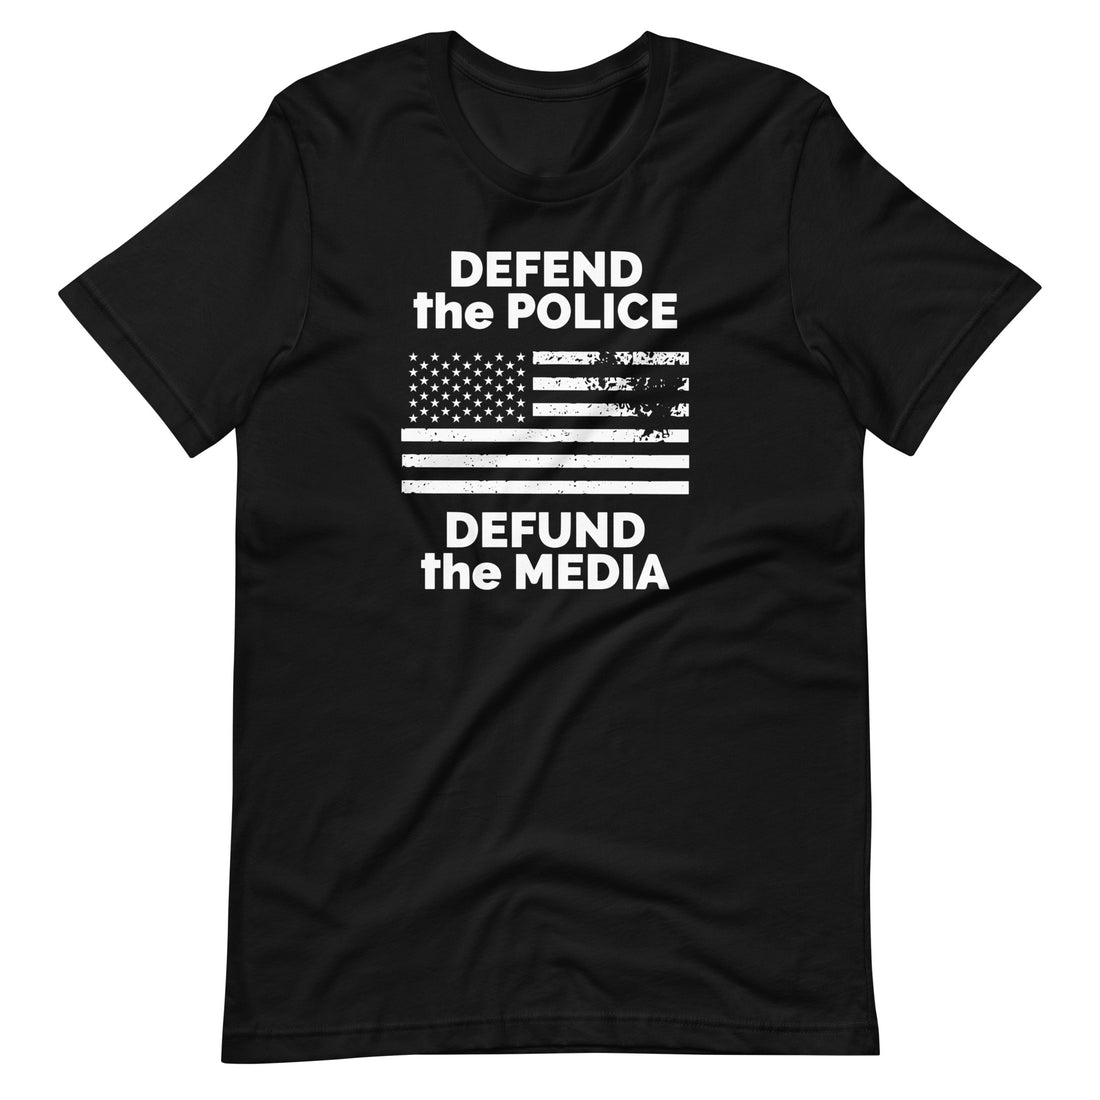 🚔 Defend the Police